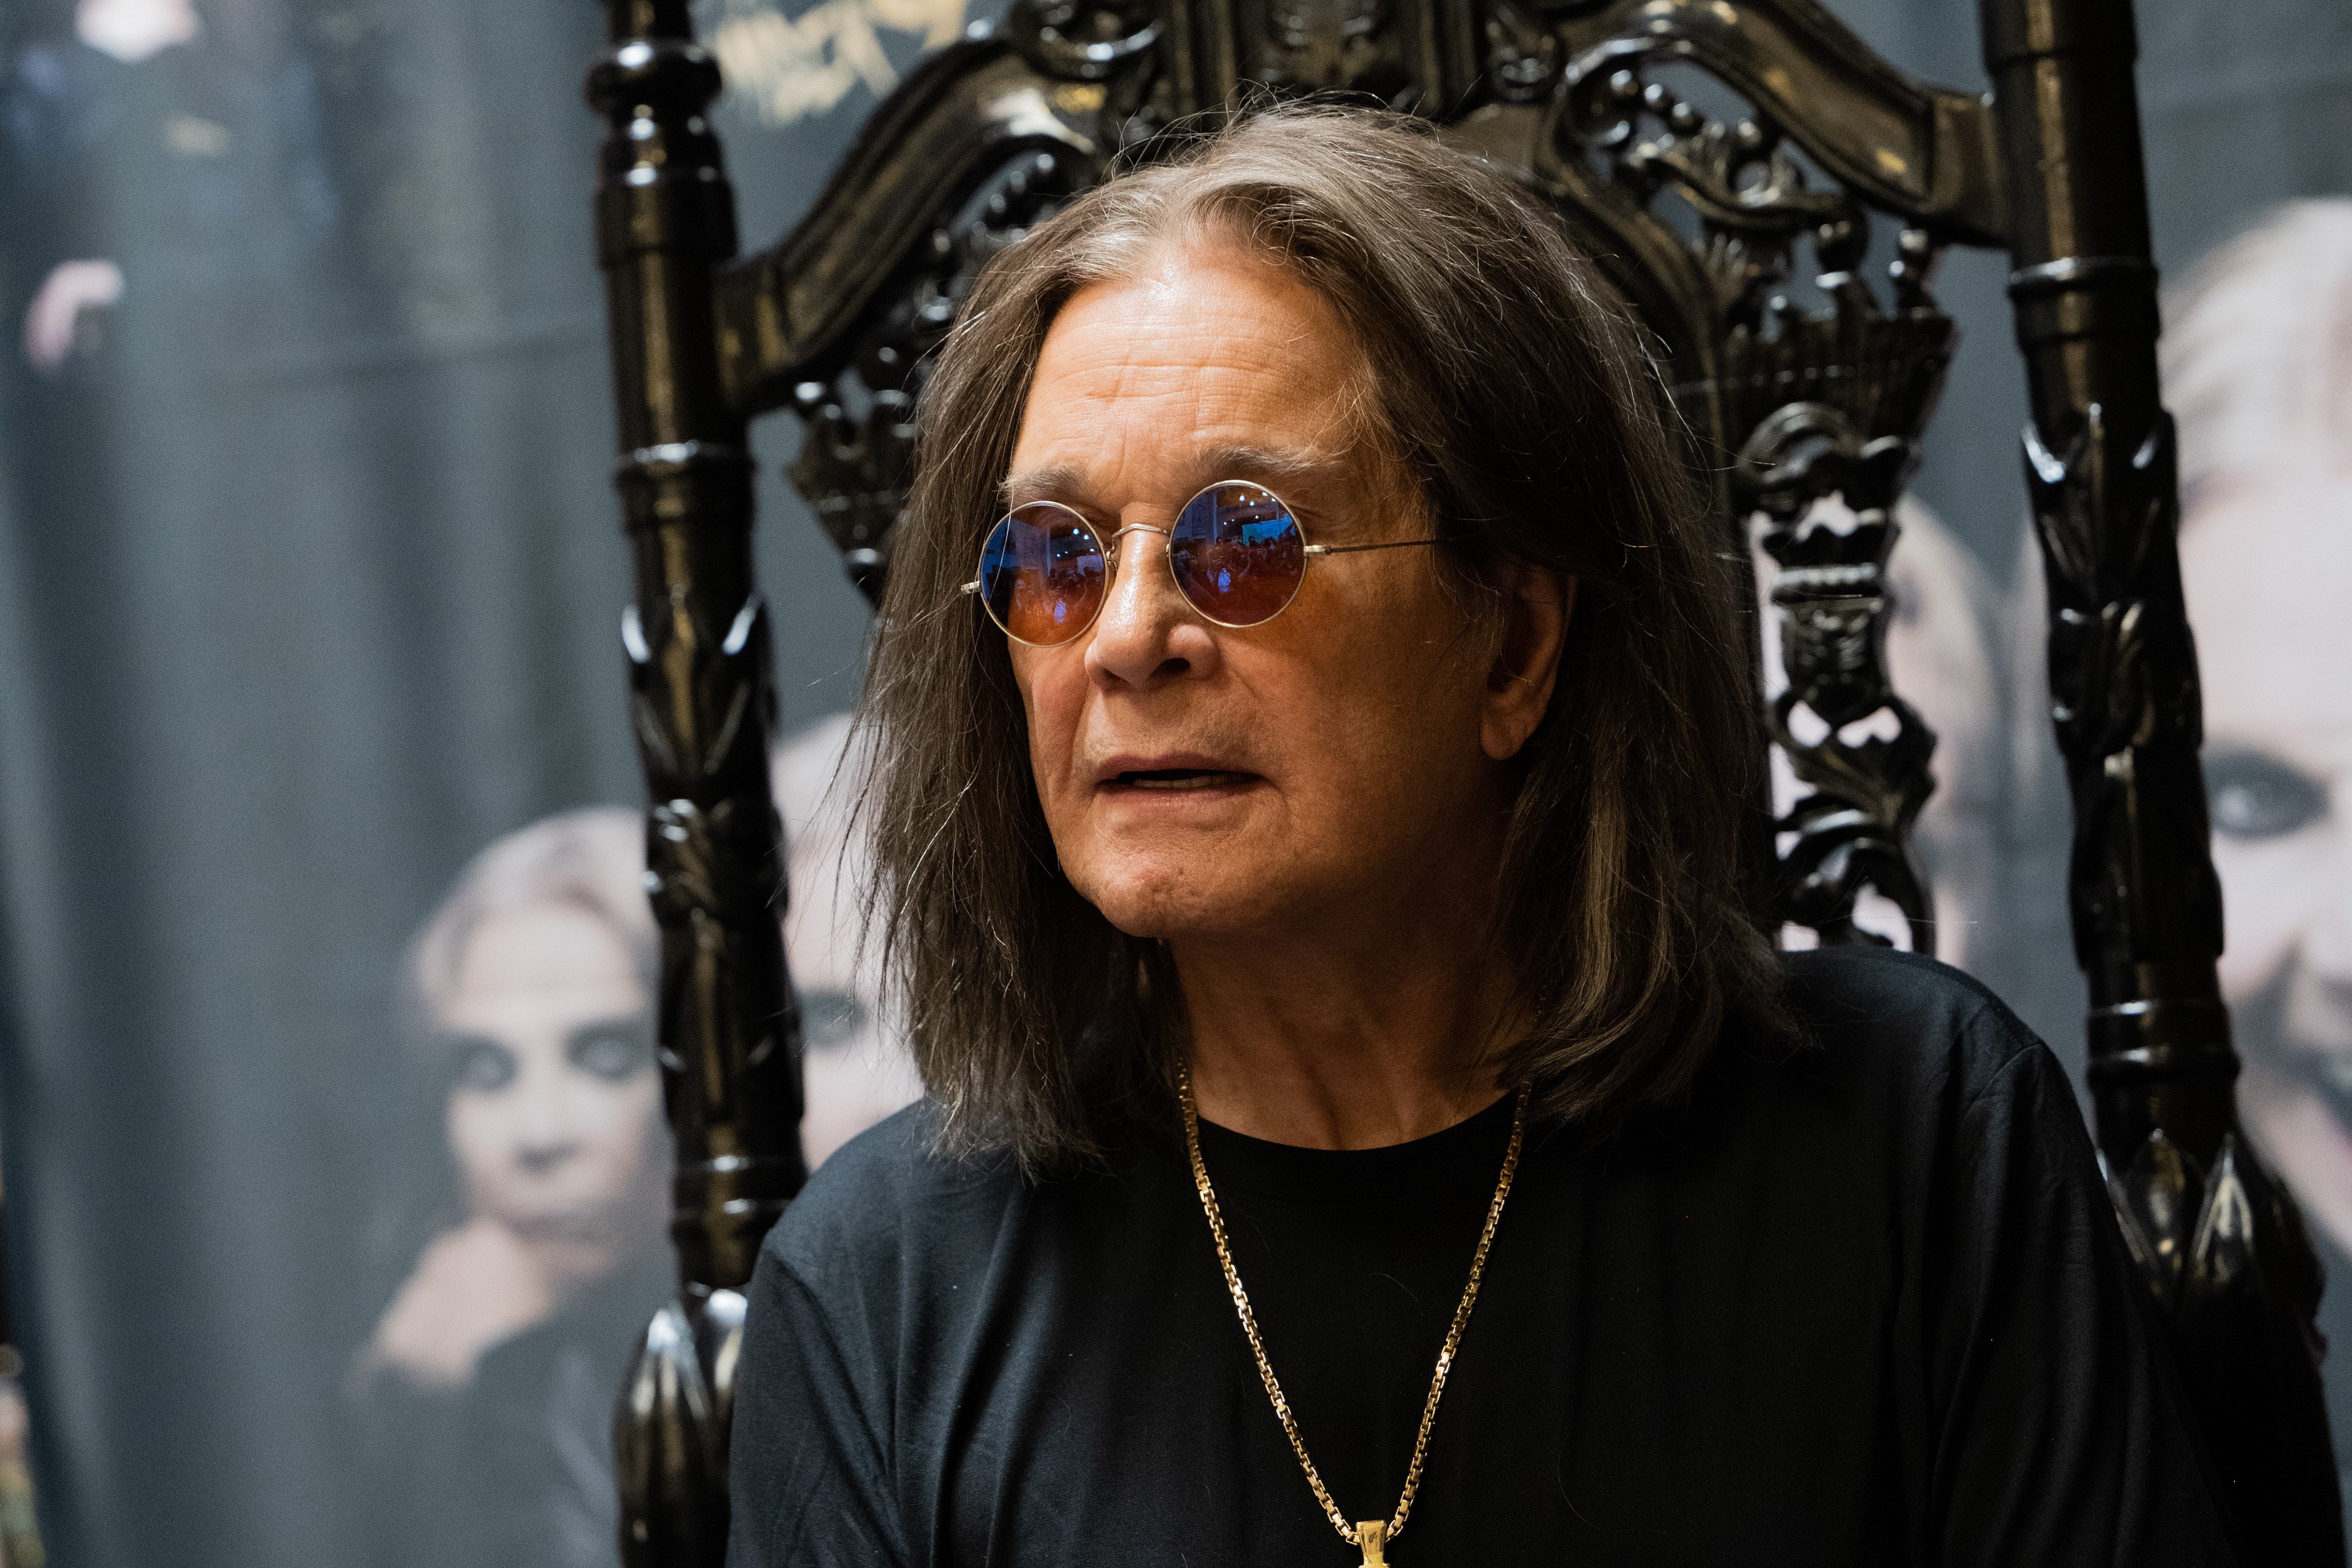 Ozzy Osbourne signs copies of his album "Patient Number 9" at Fingerprints Music on September 10, 2022 in Long Beach, California | Source: Getty Images